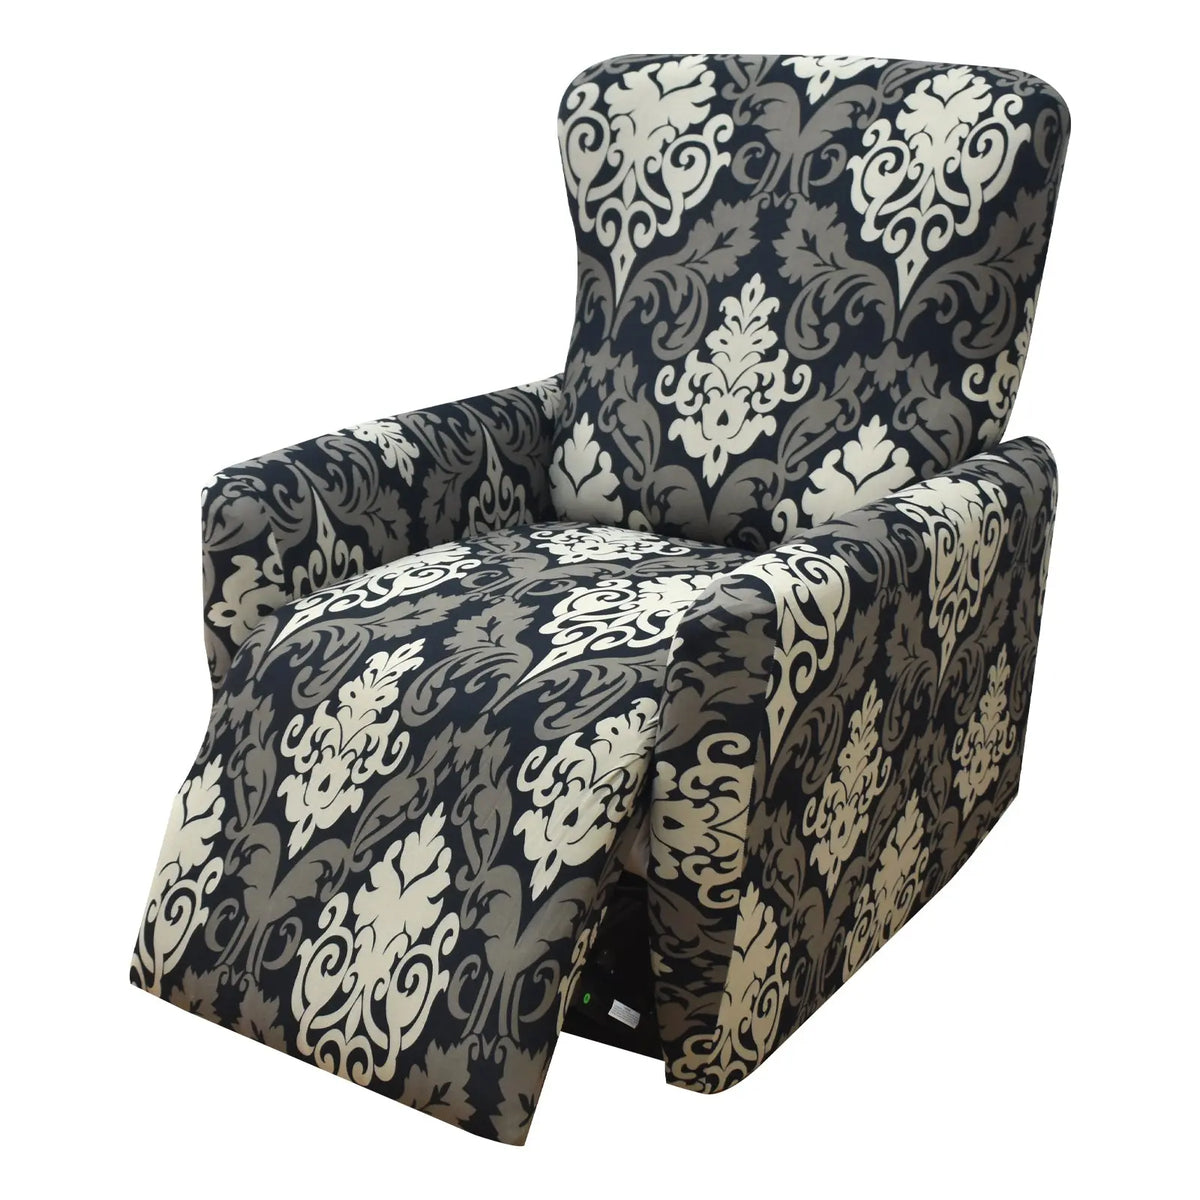 Classical Printing Recliner Cover Sofa Cover Including Include 1 Backrest Cover, 1 Seat Cover, 2 Armrest Cover Crfatop %sku%